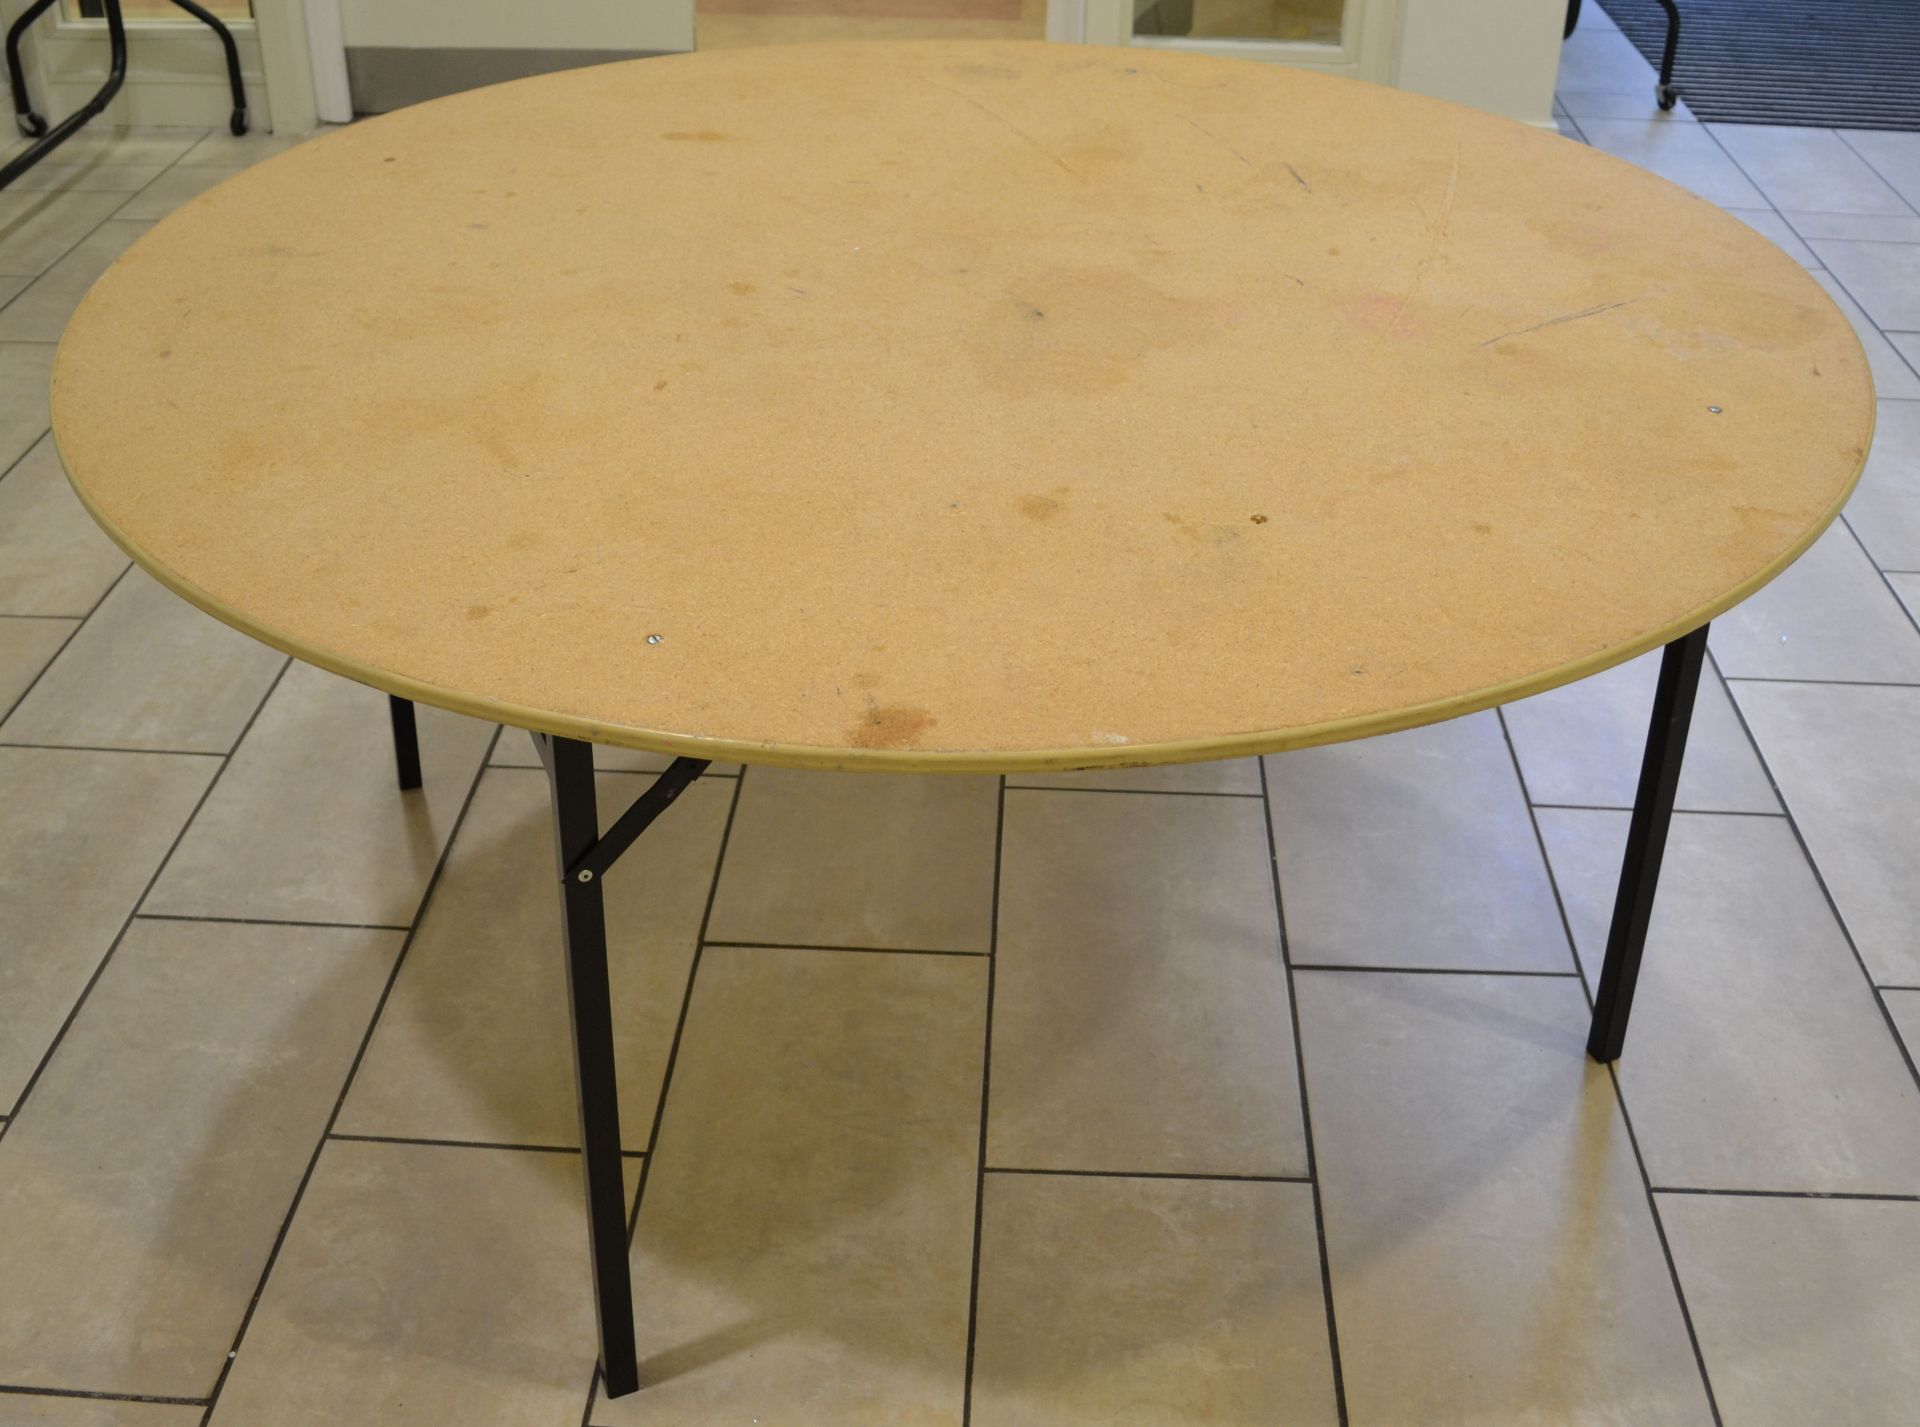 4 x 5 Foot Folding Round Banqueting Tables - CL152 - Location: Altrincham WA14 With a rubber-edged - Bild 3 aus 12